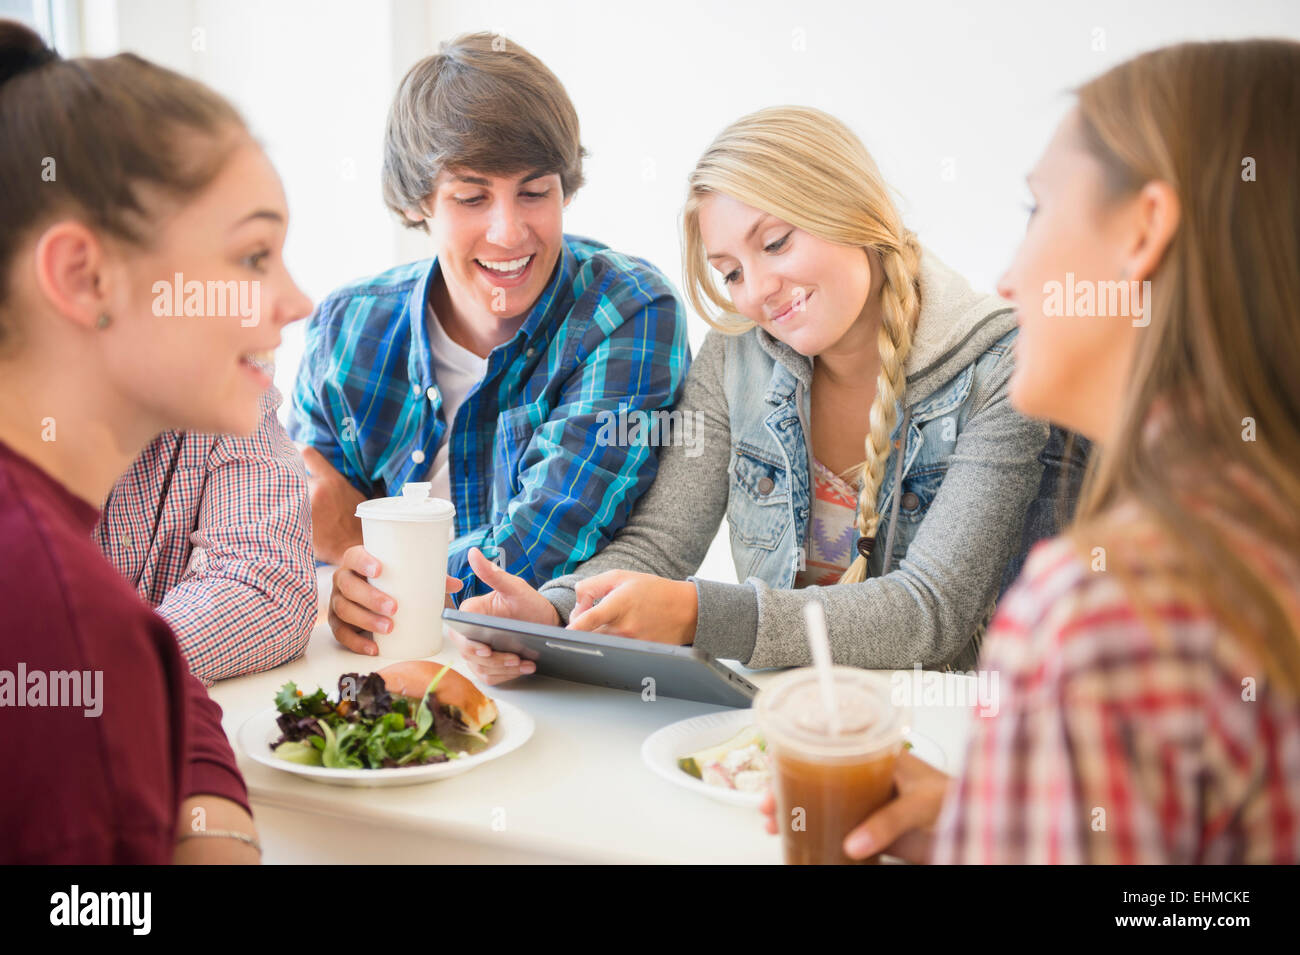 Teenagers using digital tablet at table Stock Photo